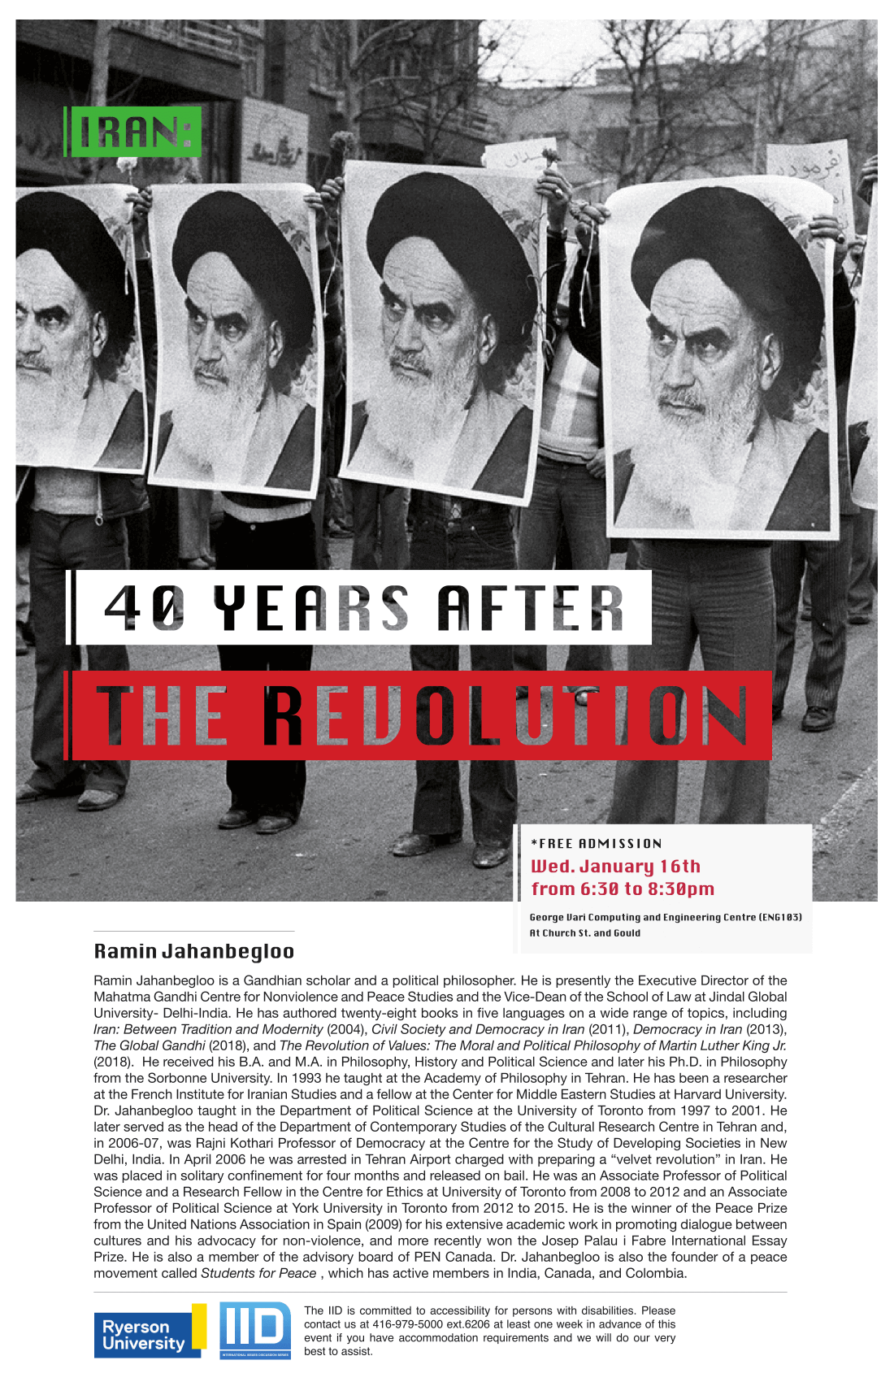 Iran: 40 Years After the Revolution – Wednesday, January 16, 2019.